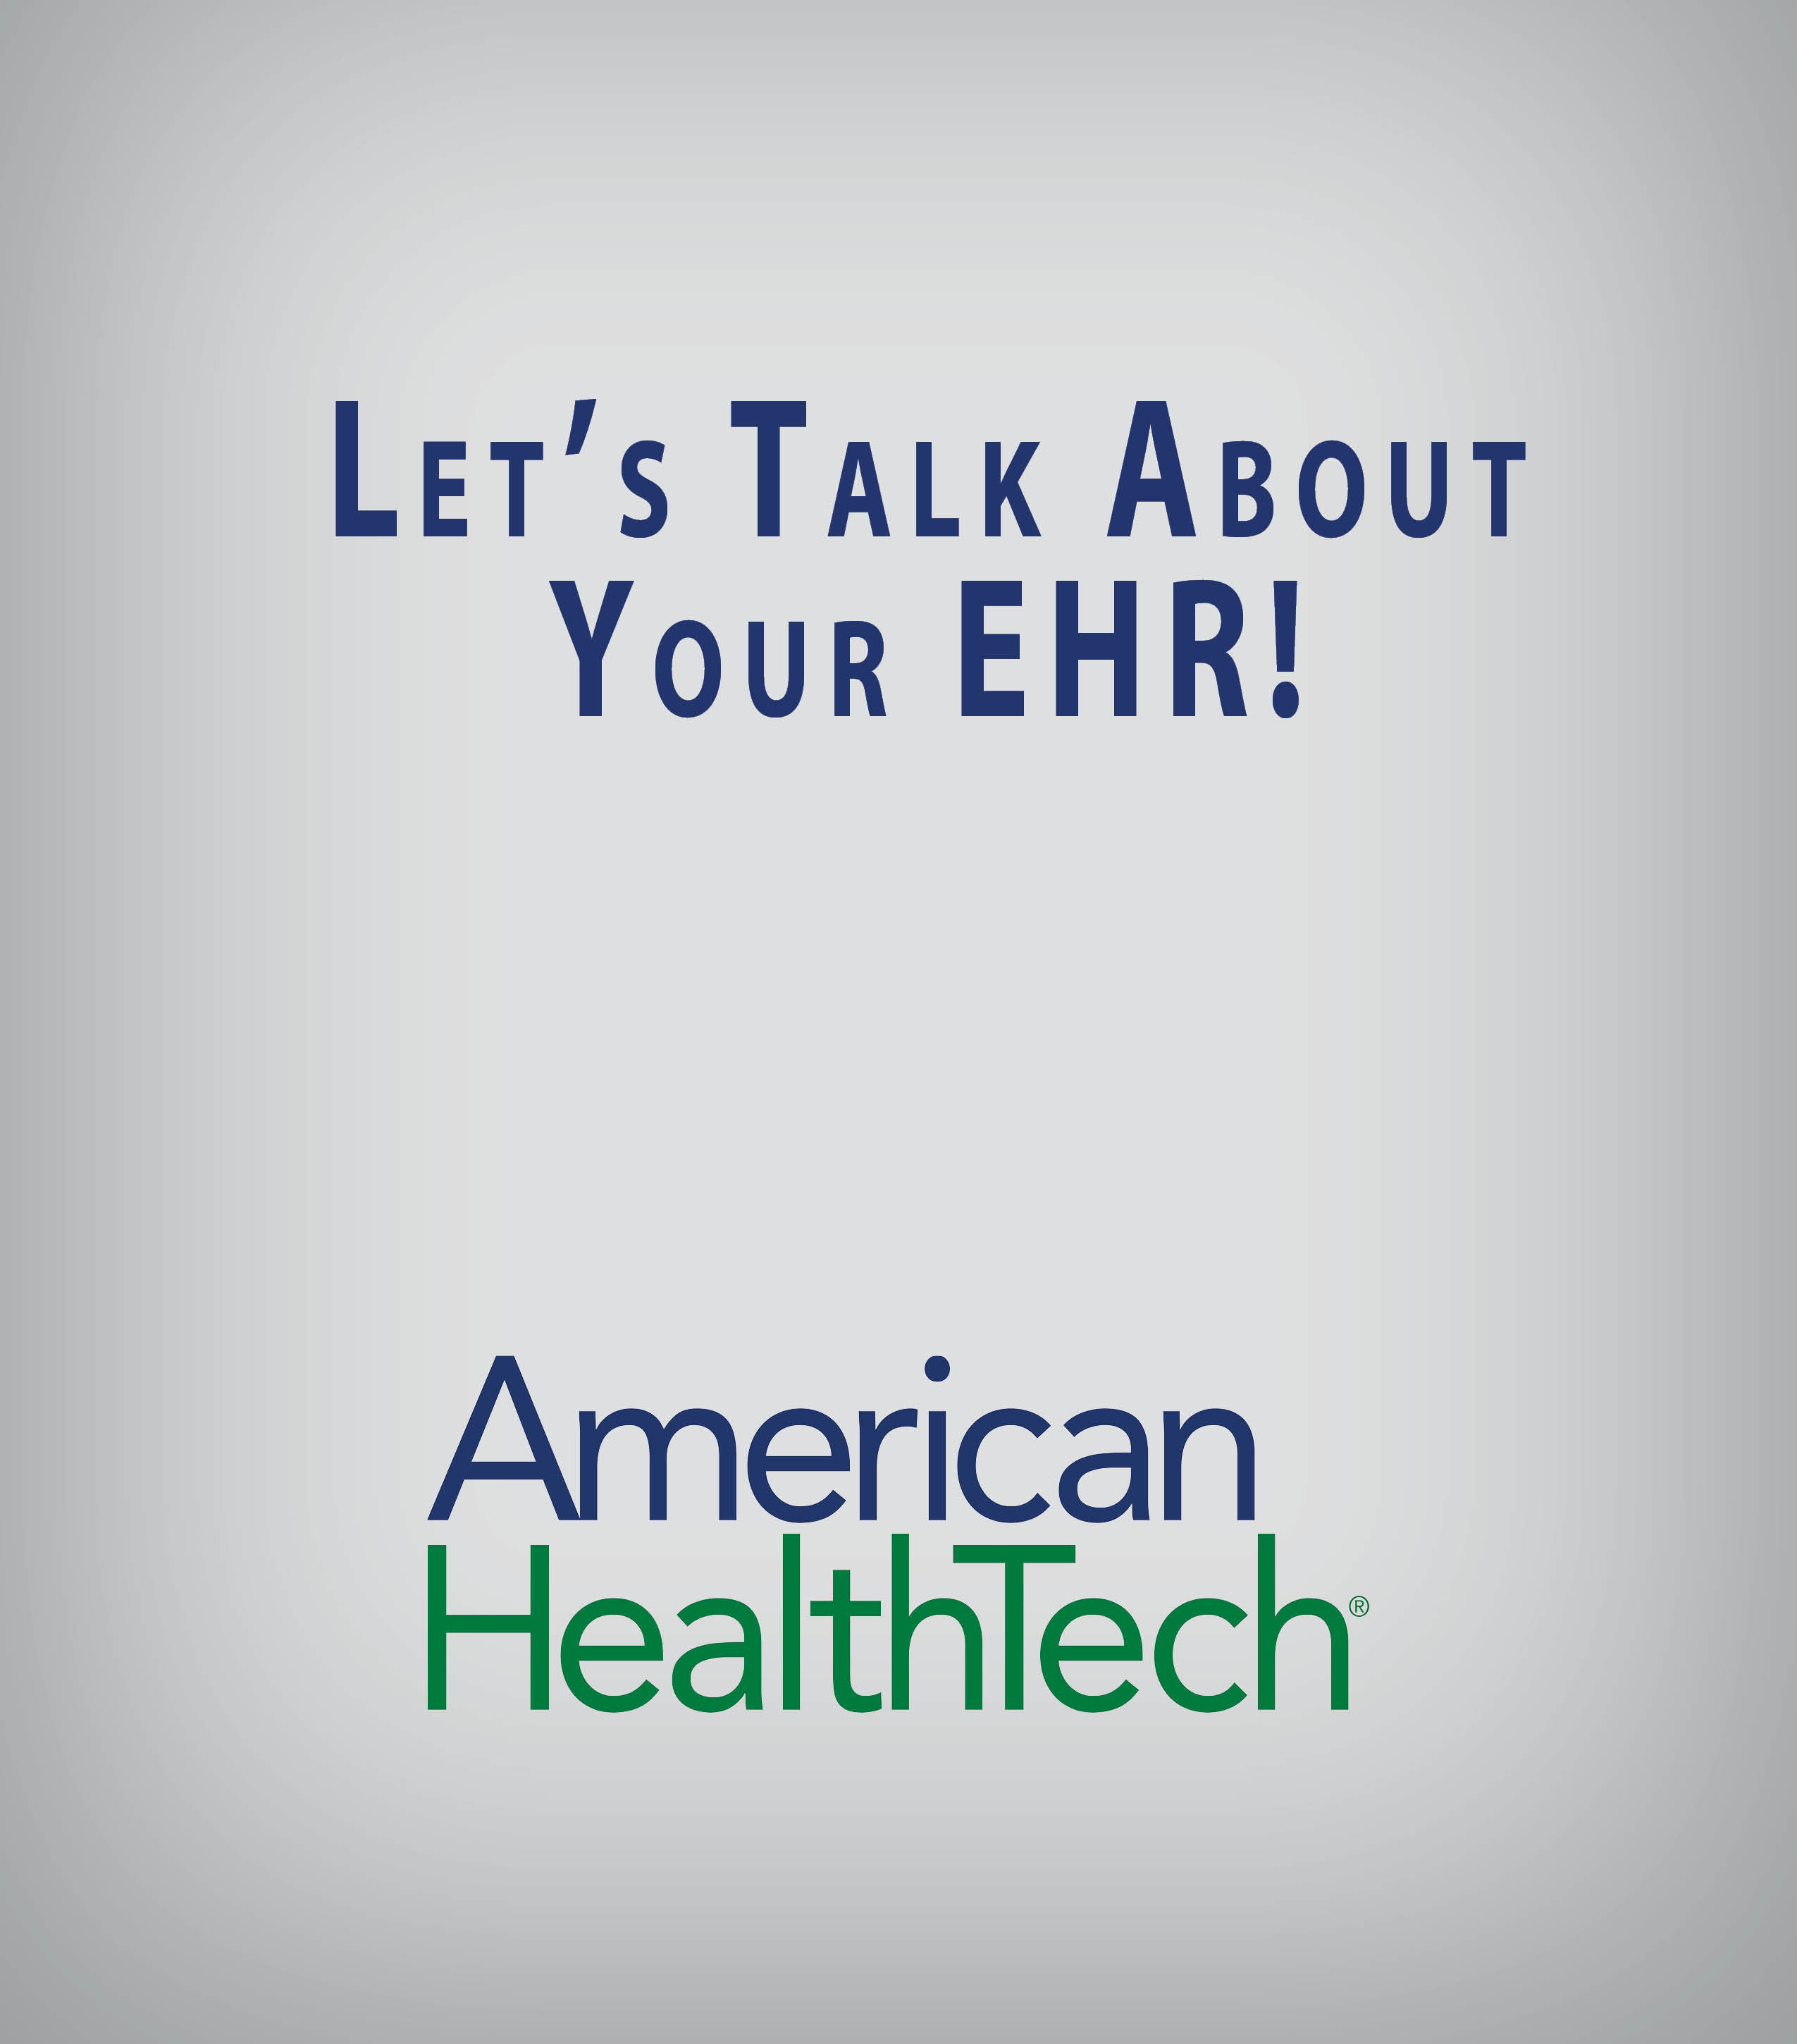 Let's Talk About Your EHR!